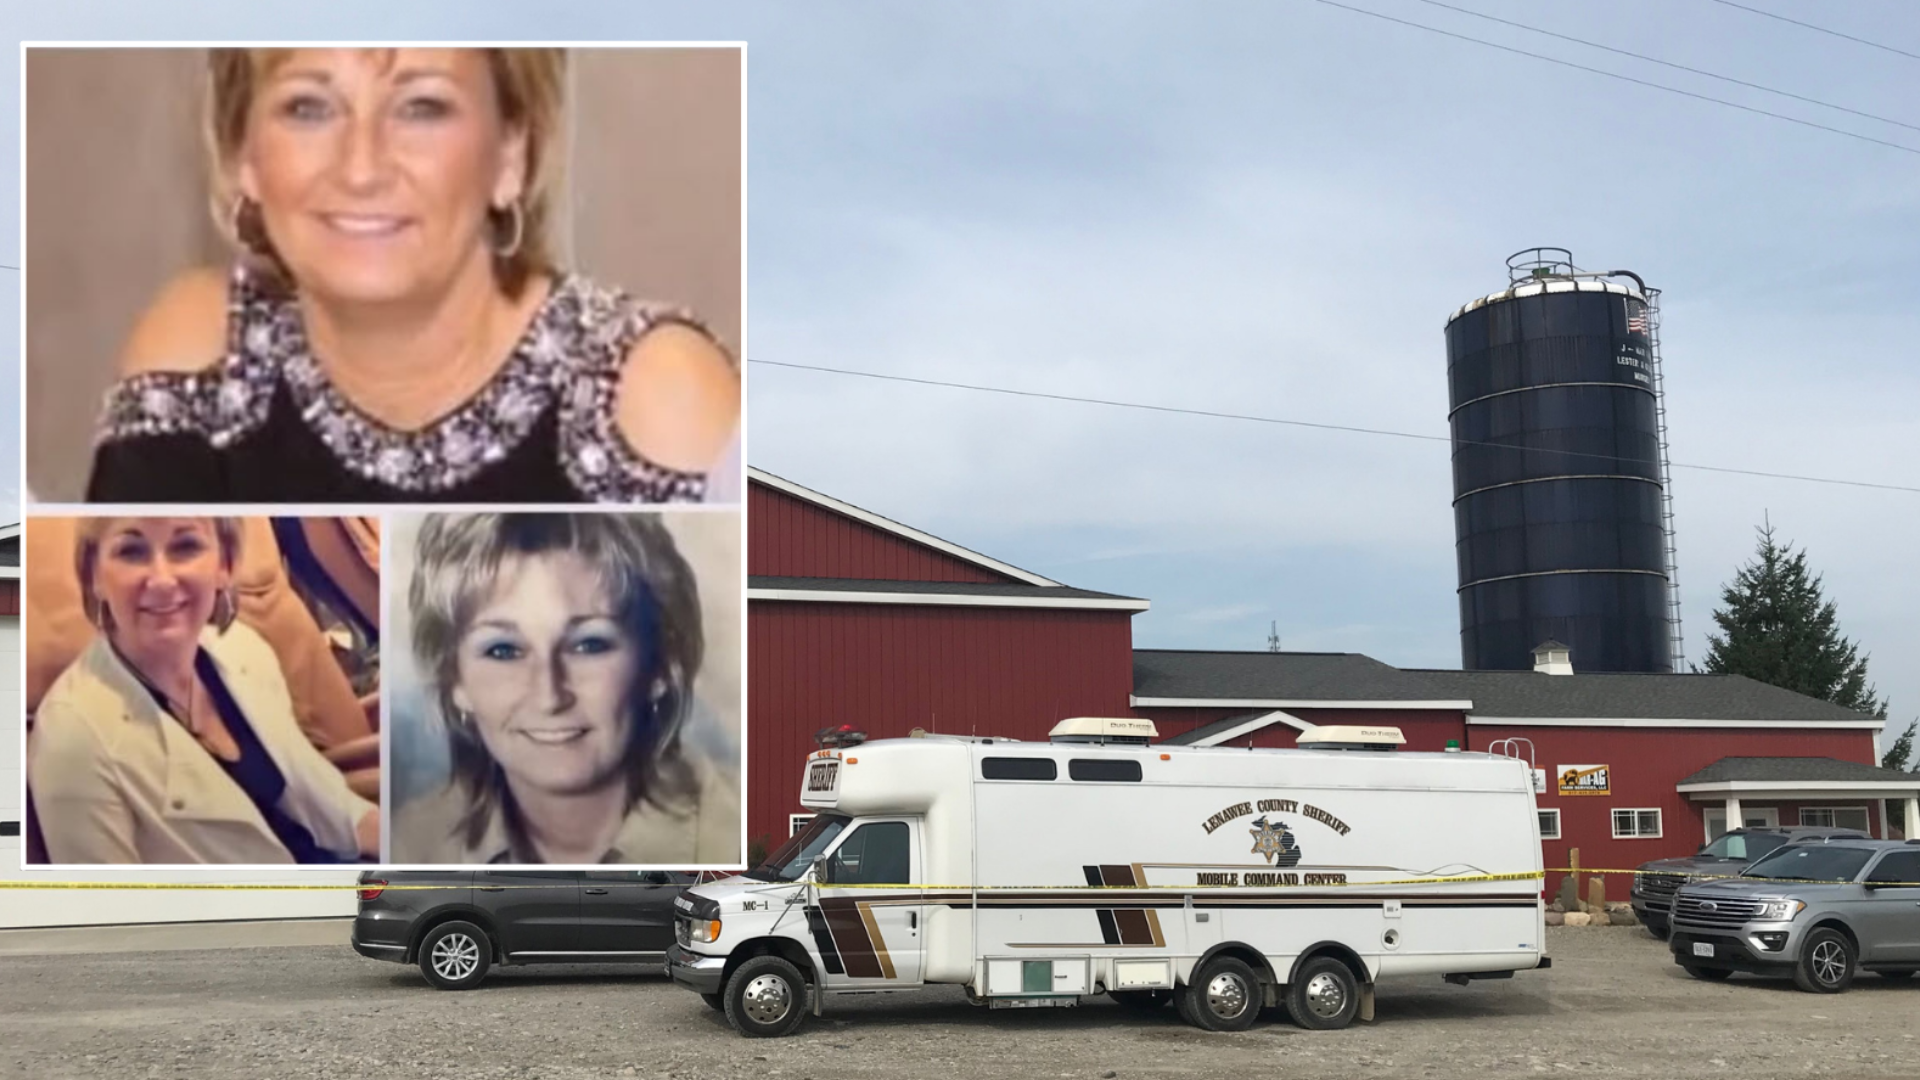 Dee Warner, 52, of Tecumseh, has not been seen since April 25. Lenawee County Sheriff Troy Bevier said there wasn't any specific tip that led to Monday's search.